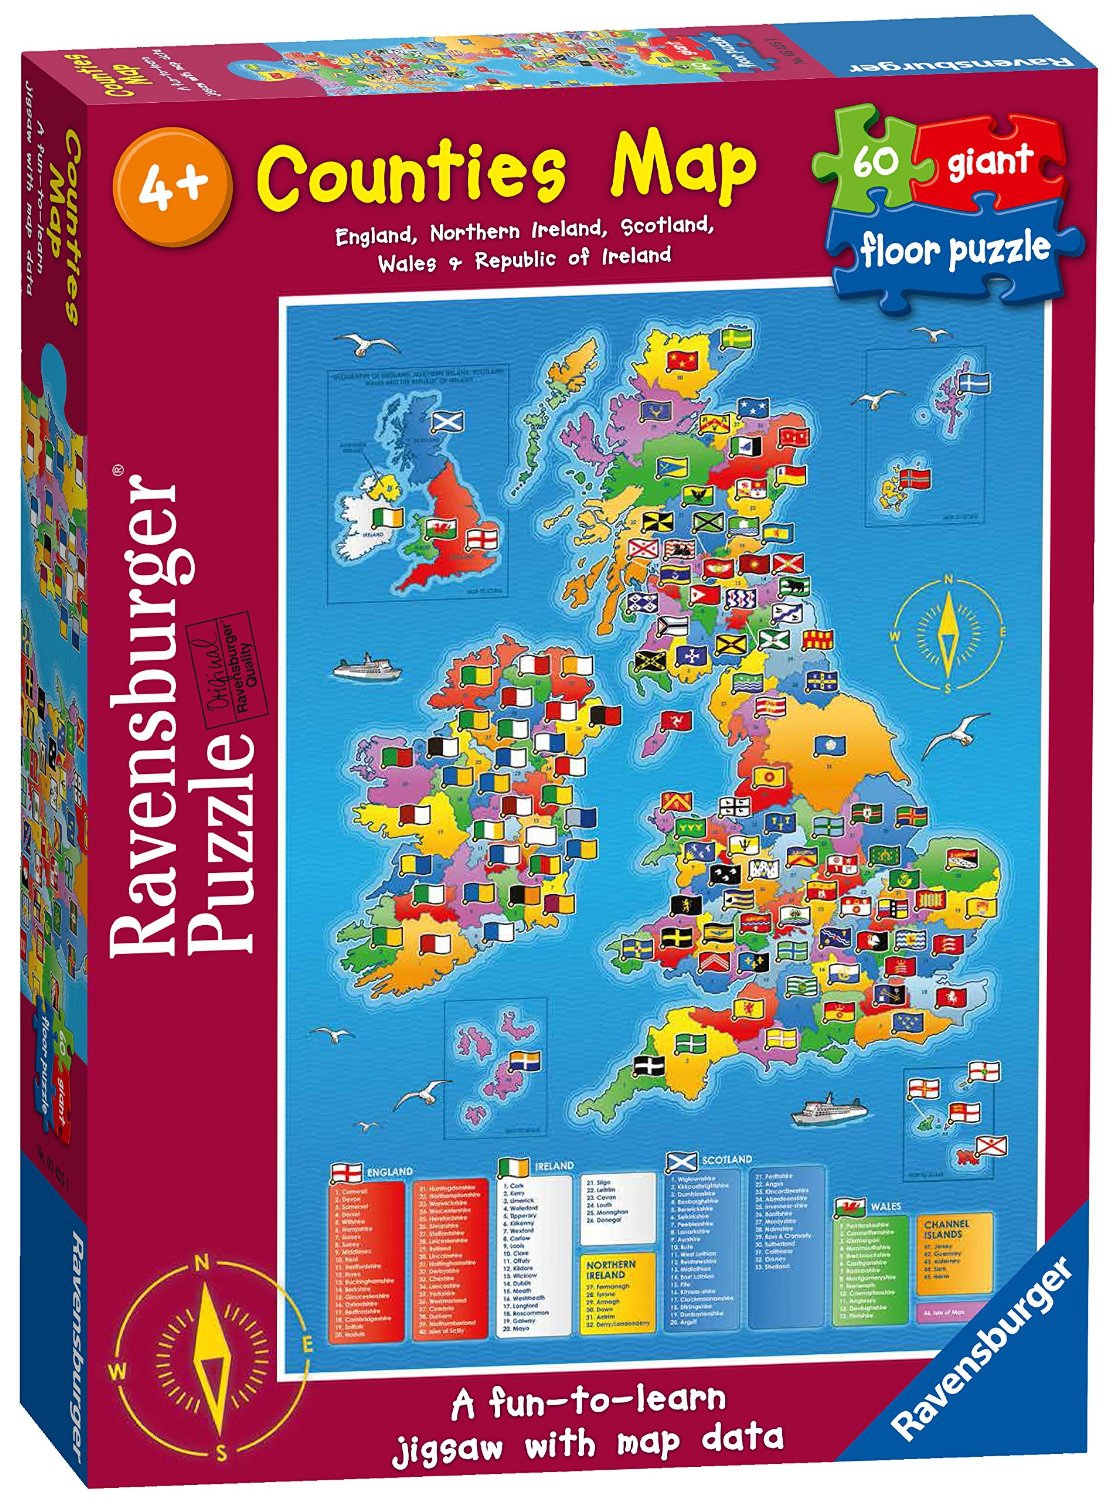 British Isles 'Counties Map' 60 Piece Jigsaw Puzzle Game